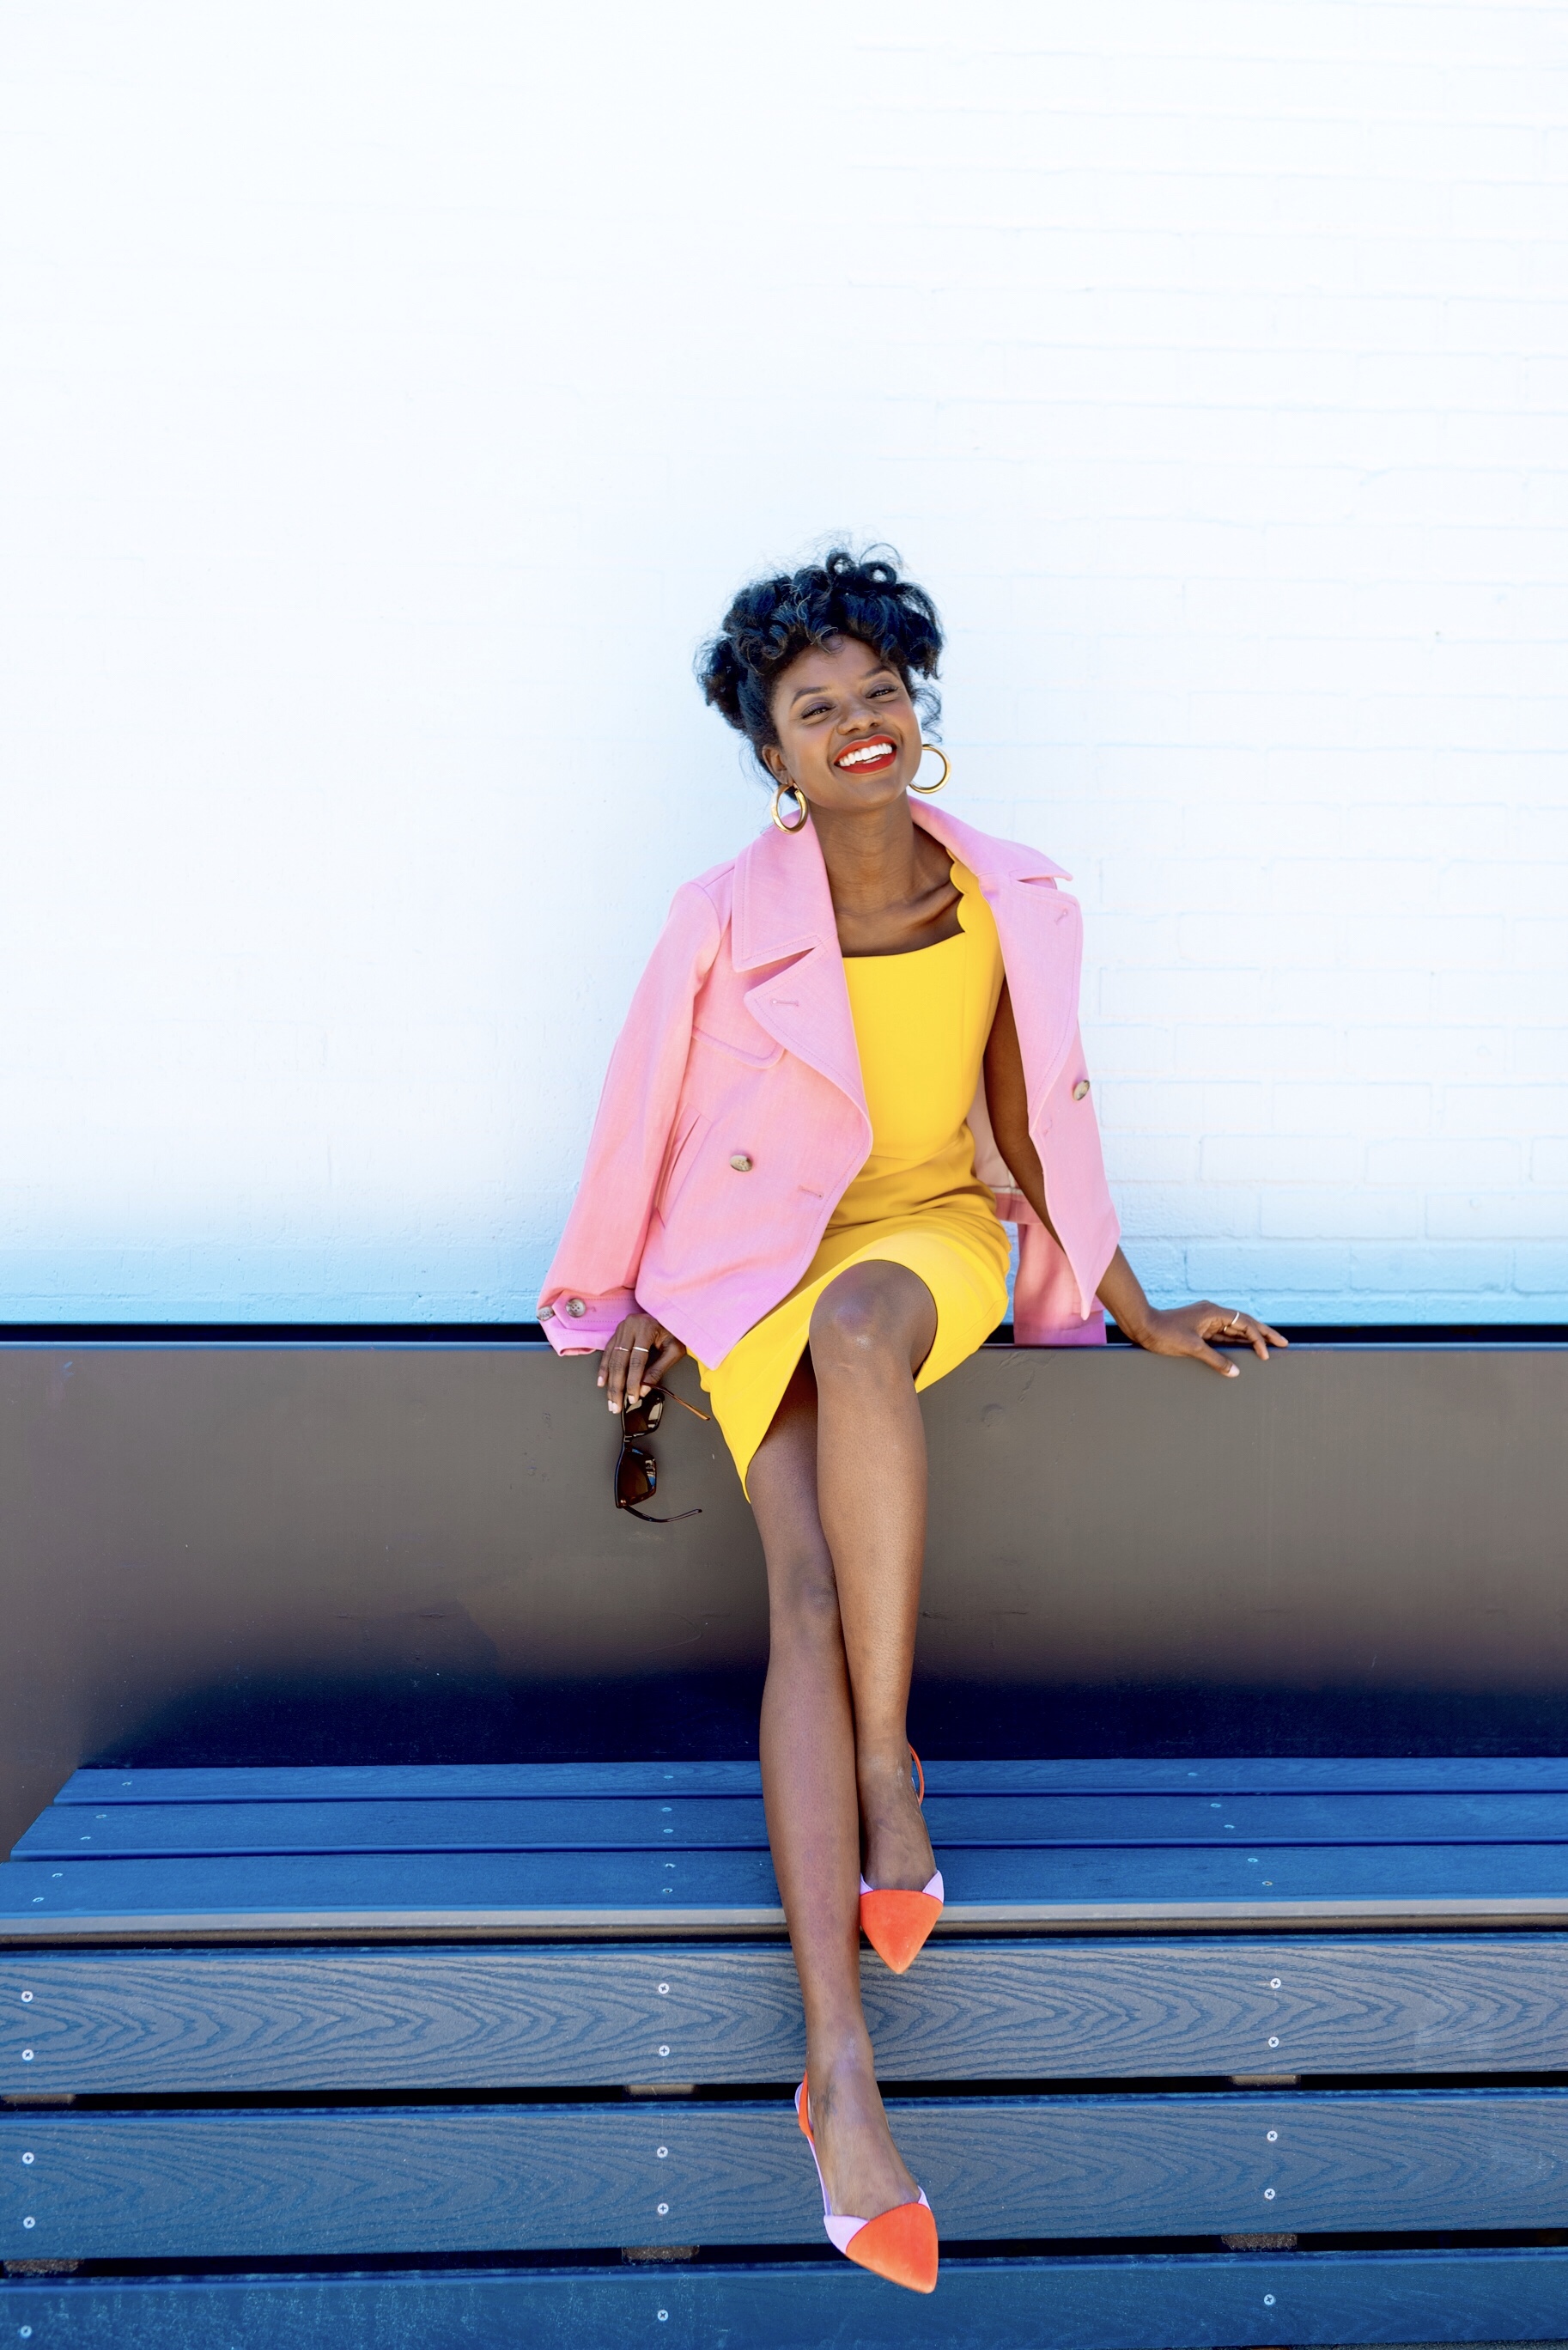 short trench coat, pink trench coat, Easter Sunday, Easter Dresses for women, Easter Sunday outfit ideas, suede sling back heels, color blocked shoes, how to style a short trench coat, natural hair, short natural hair, 4bhair, 4chair , easy natural hair styles, Authentically B